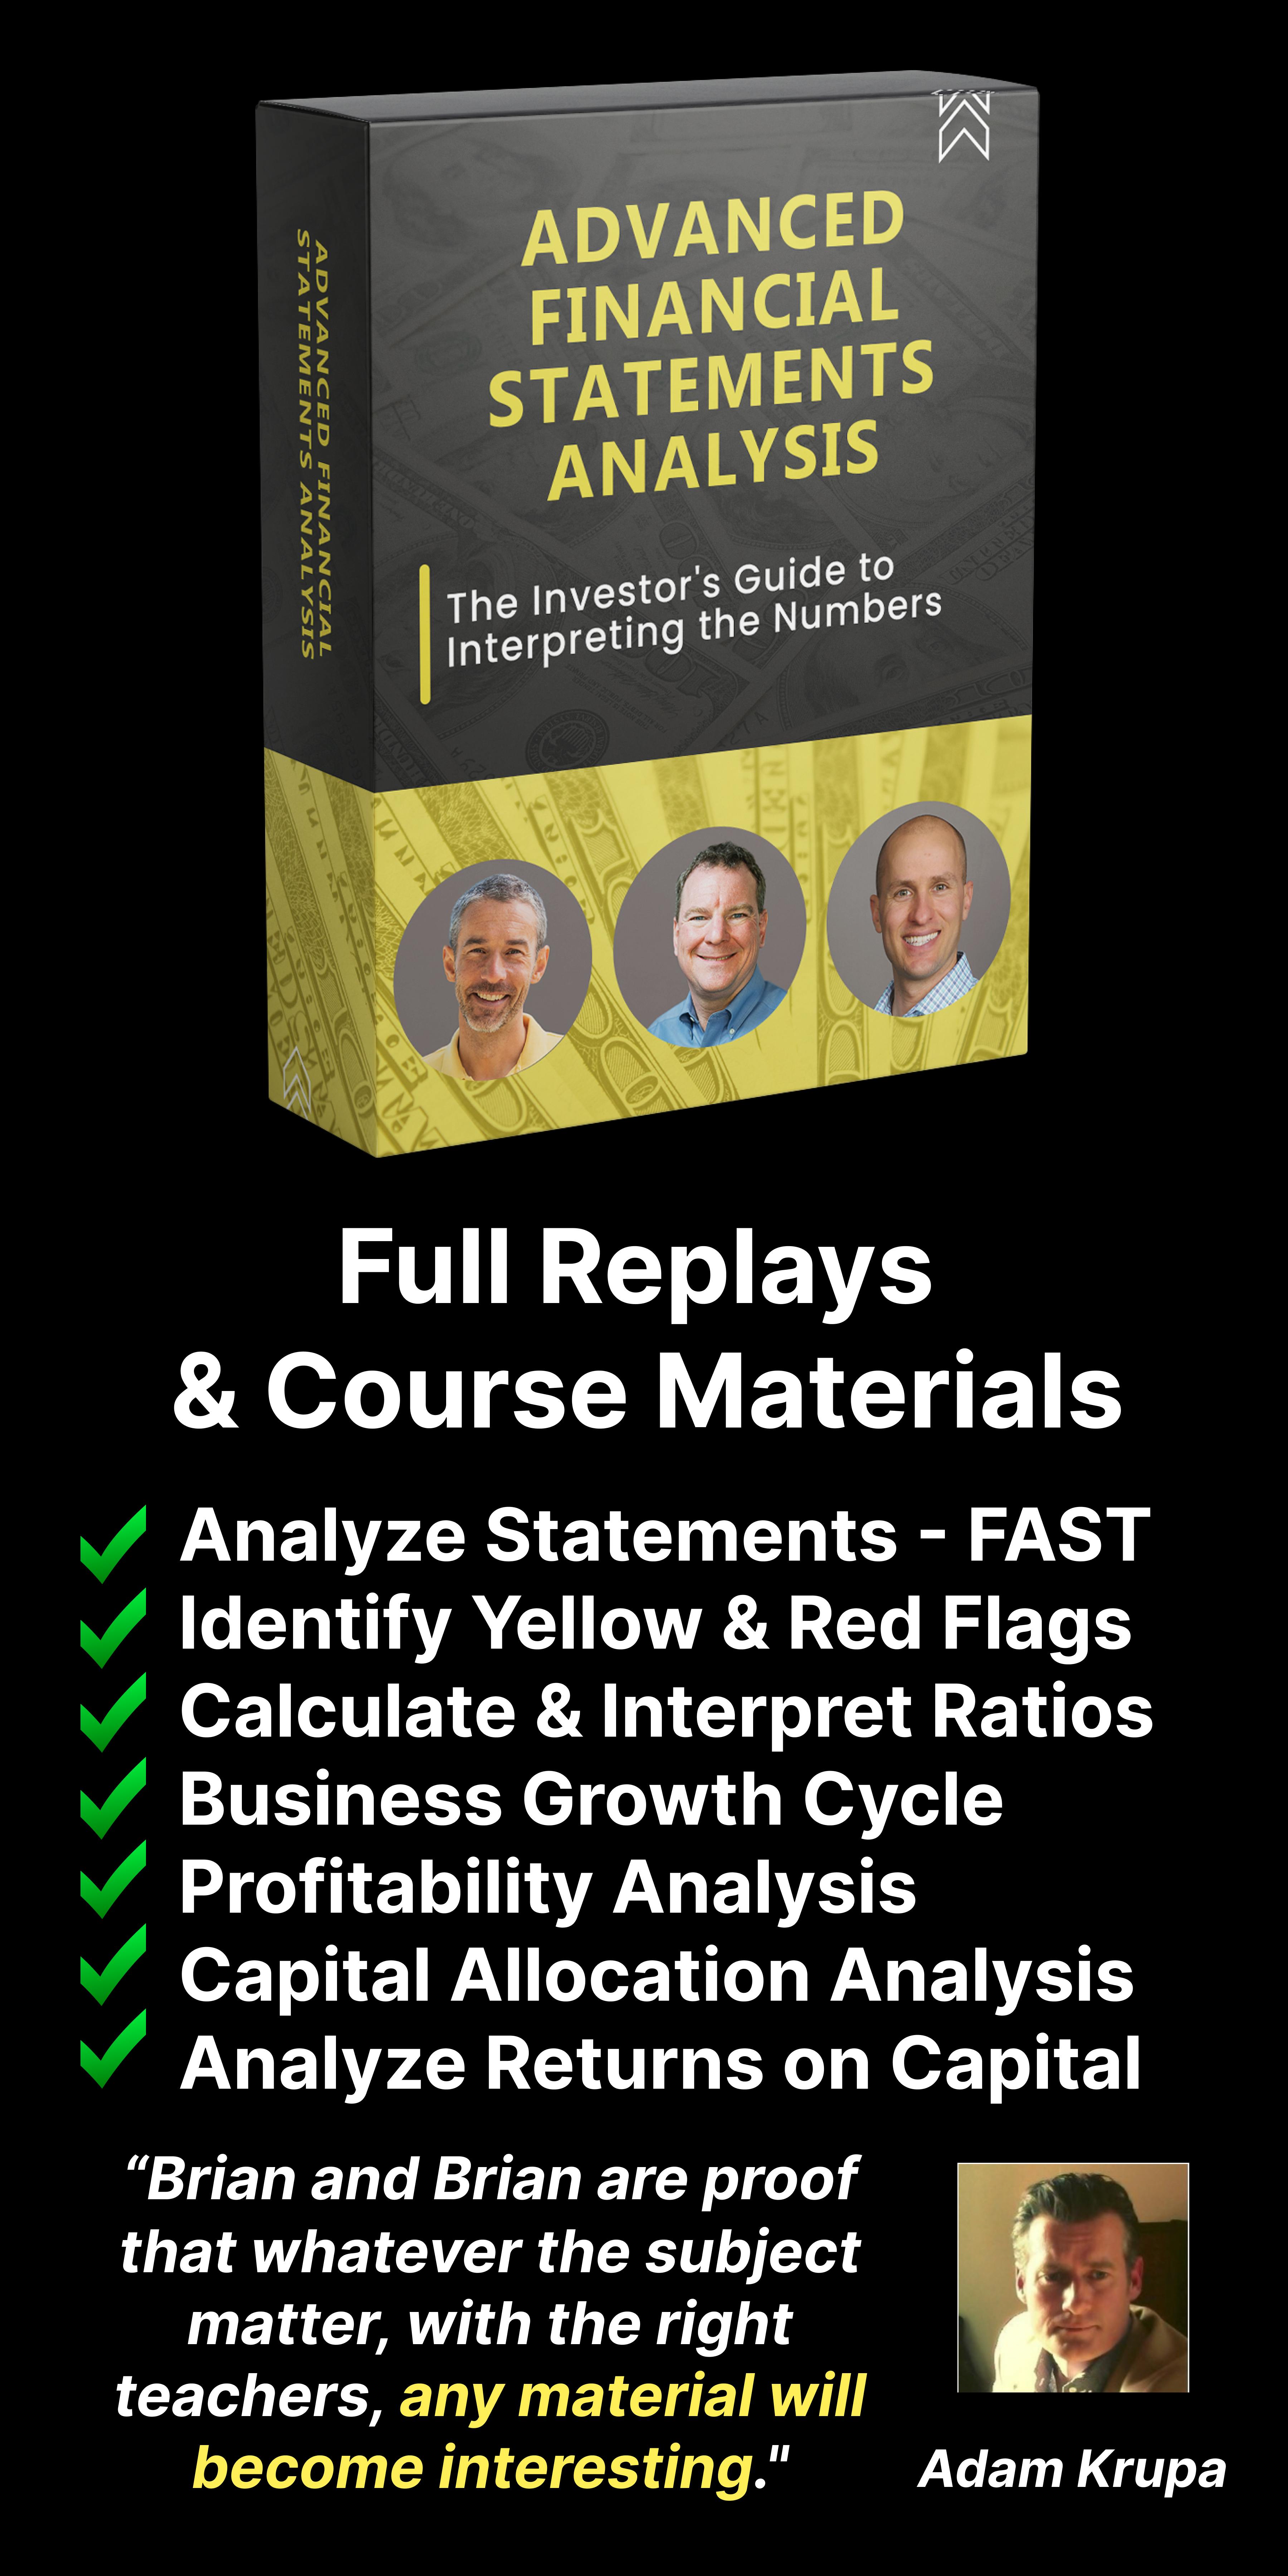 Advanced Financial Statements Analysis - Self-paced course